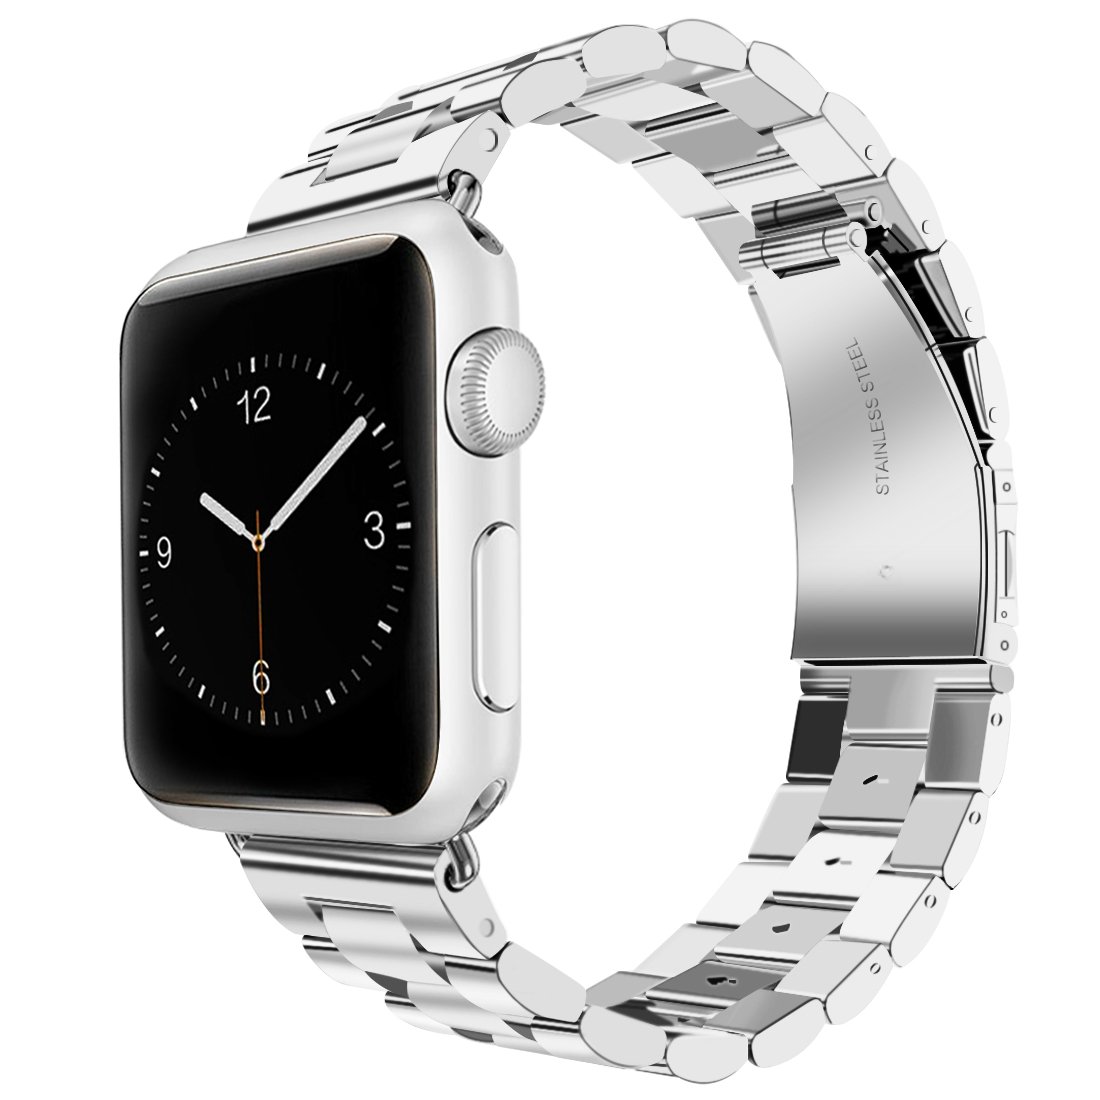 Stainless Steel Metal Band Strap for Apple Watch 1 / 2 / 3 / 4 / 5 / 6 ...